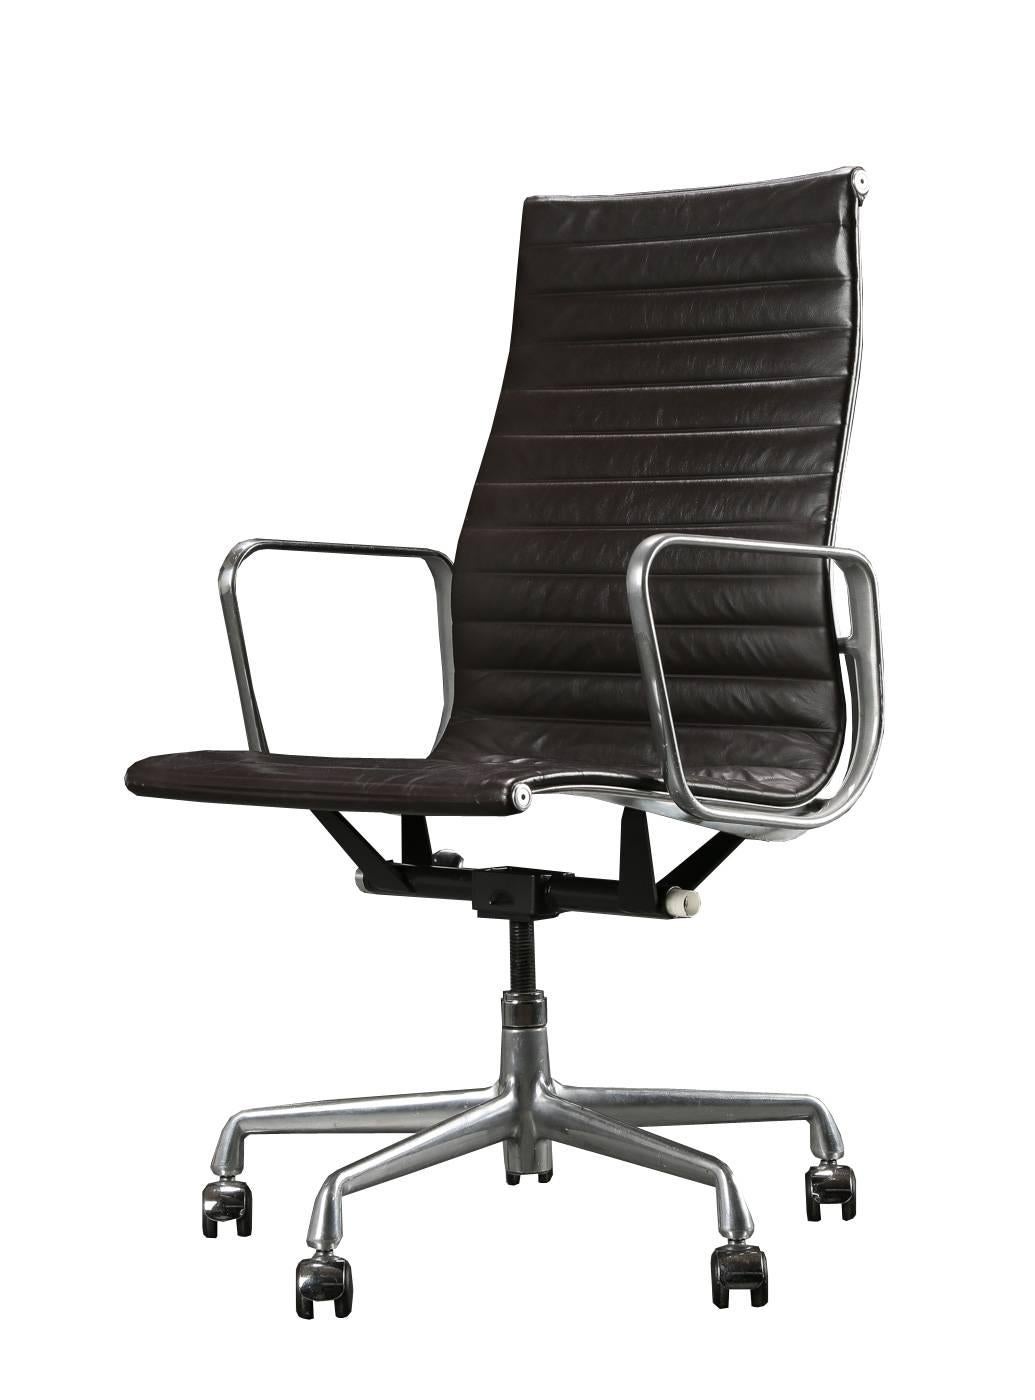 American Aluminium Series Office Chair by Charles and Ray Eames